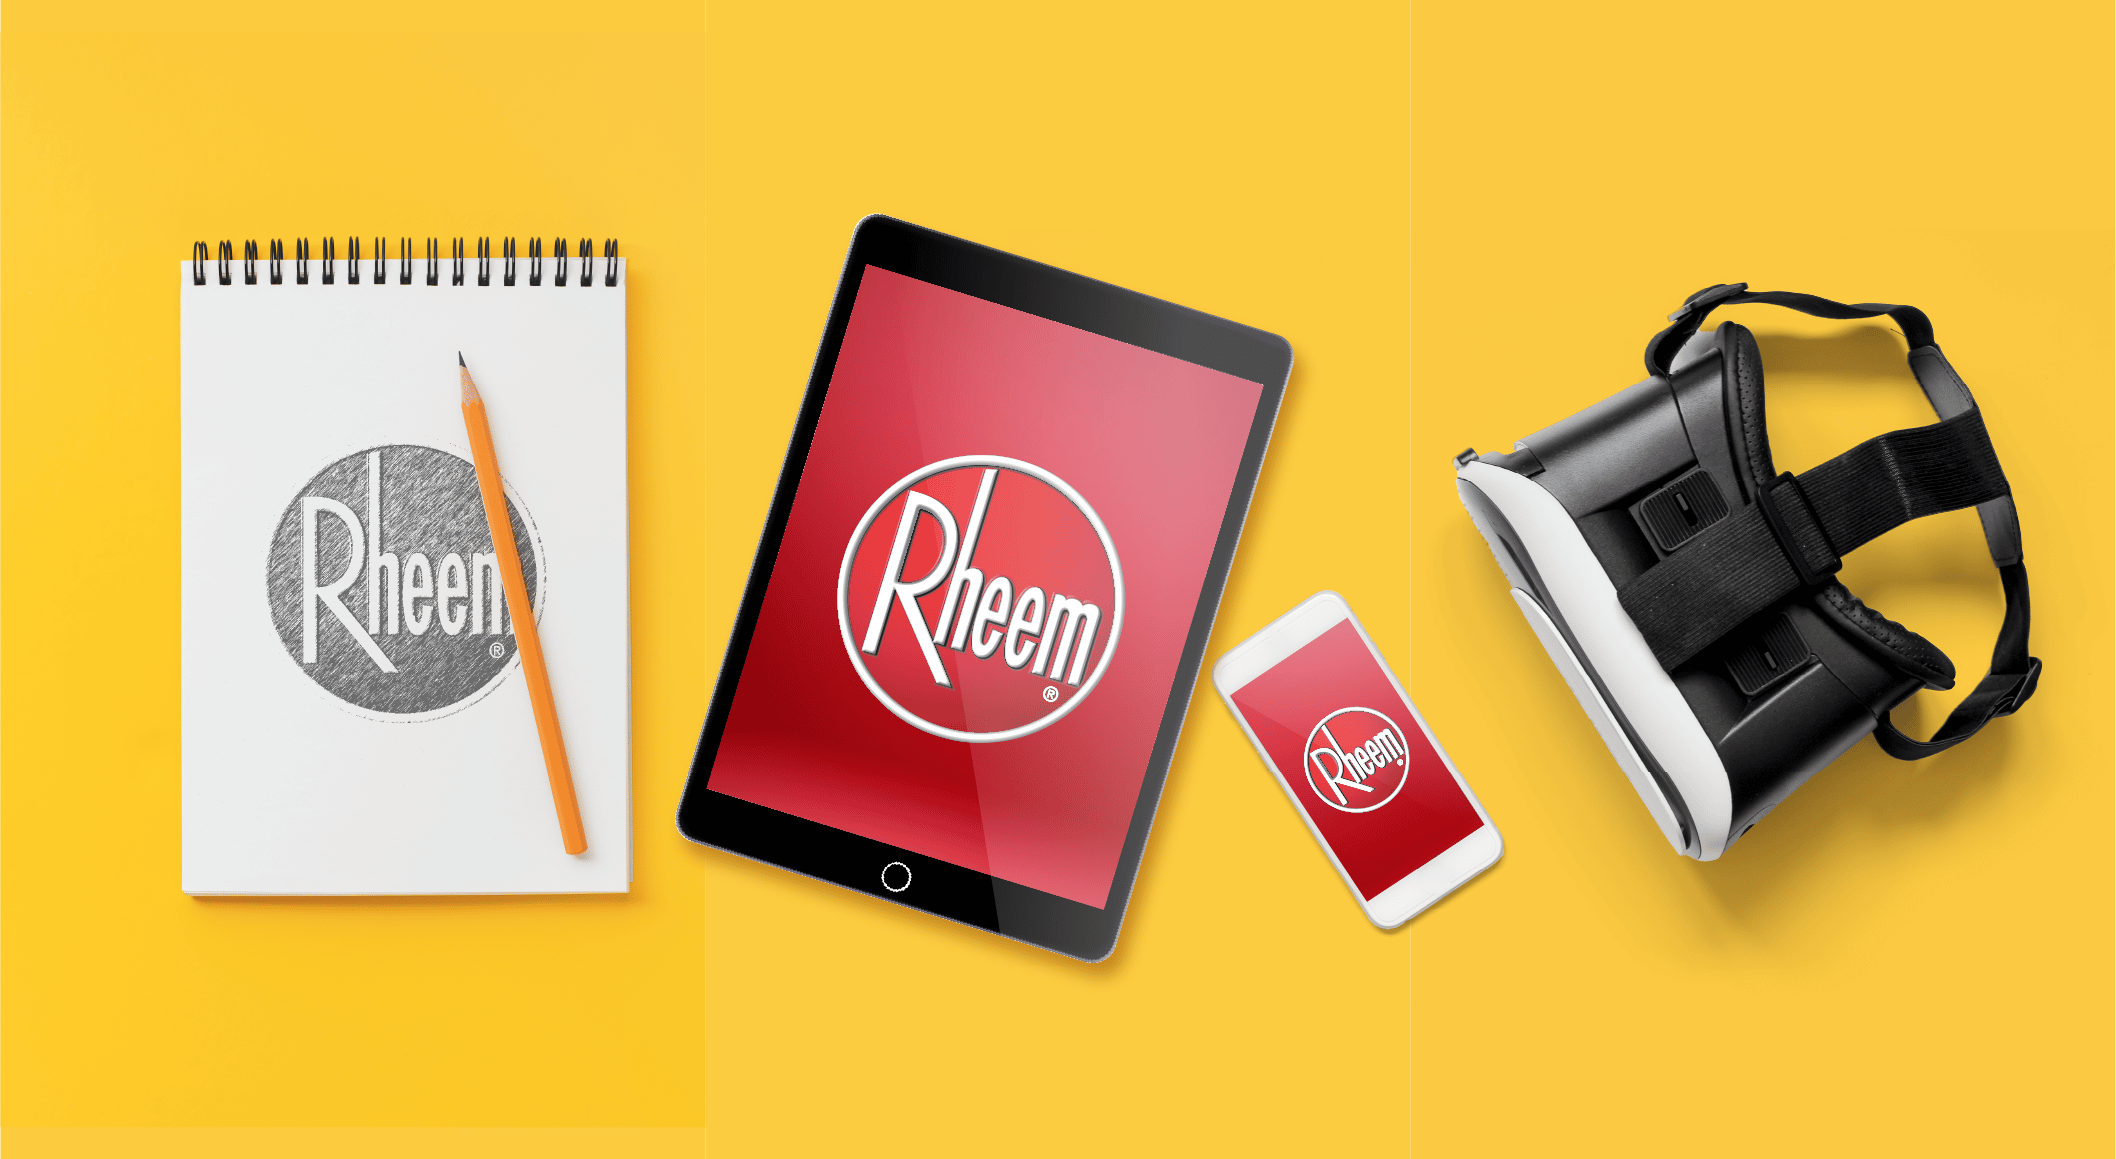 A tablet computer sitting on top of a desk next to a camera with the Rheem logo A tablet computer sitting on top of a desk next to a camera with the Rheem logo A tablet computer sitting on top of a desk next to a camera with the Rheem logo A tablet computer sitting on top of a desk next to a camera with the Rheem logo A tablet computer sitting on top of a desk next to a camera with the Rheem logo A tablet computer sitting on top of a desk with the Rheem Logo on it